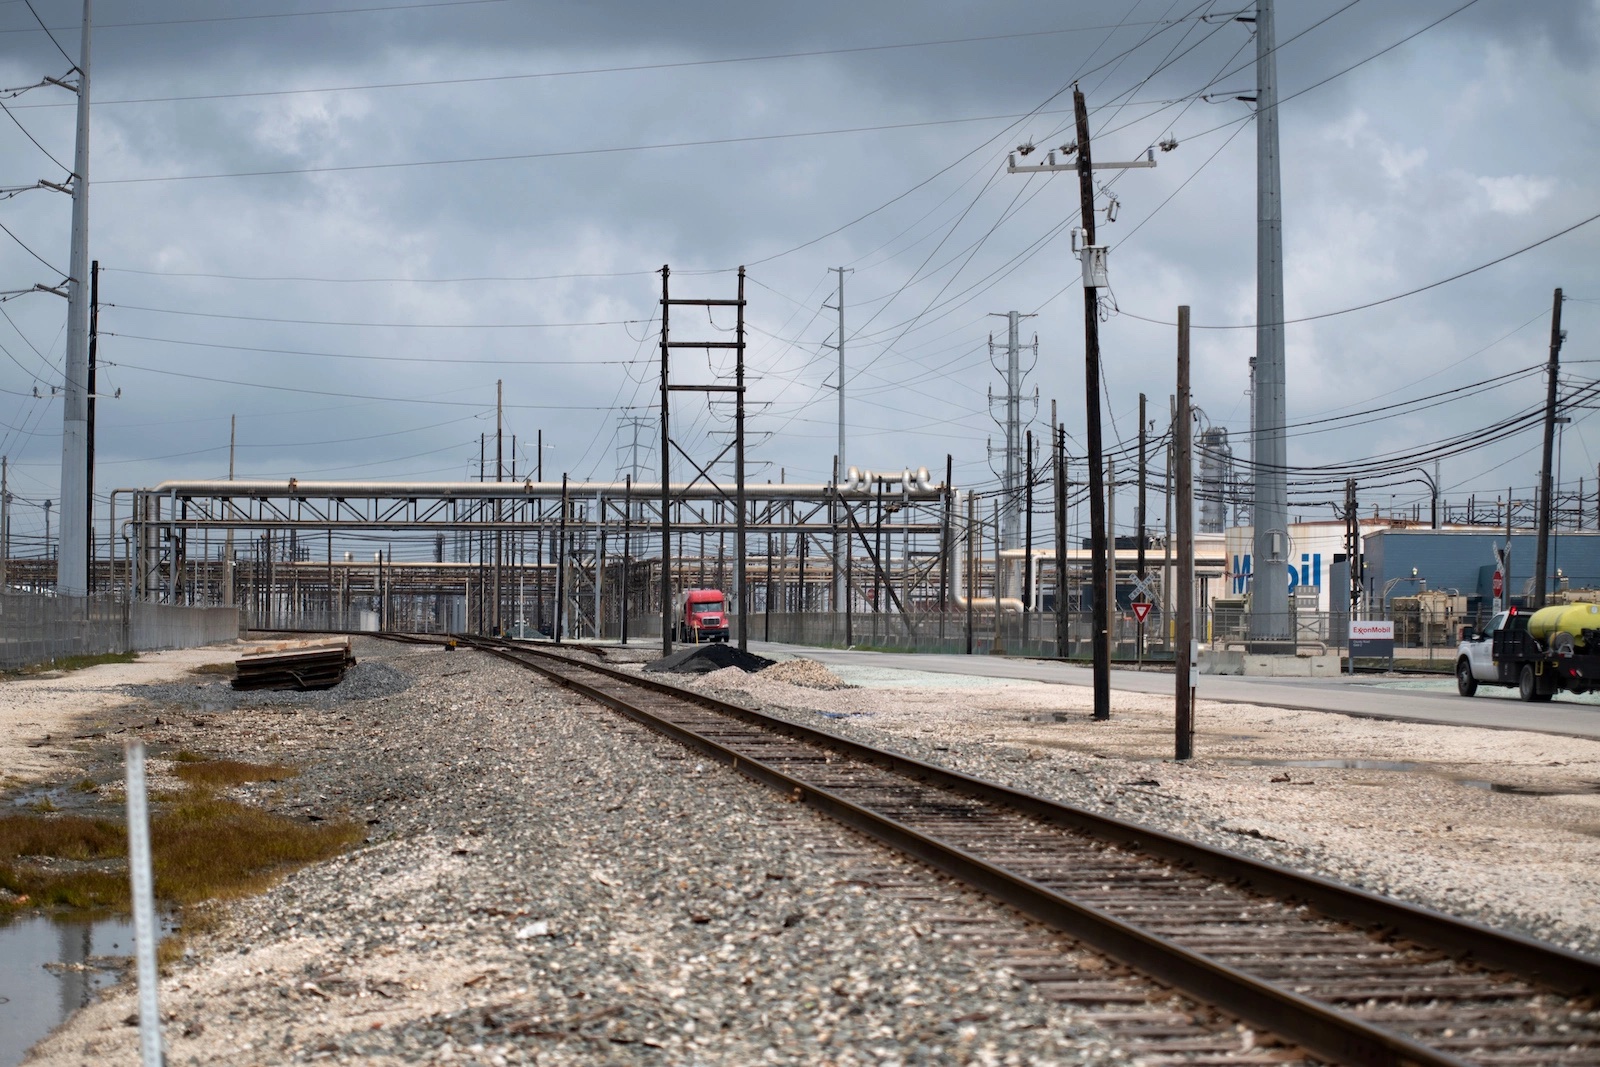 A red truck drives by a railroad track surrounded by industrial plants.